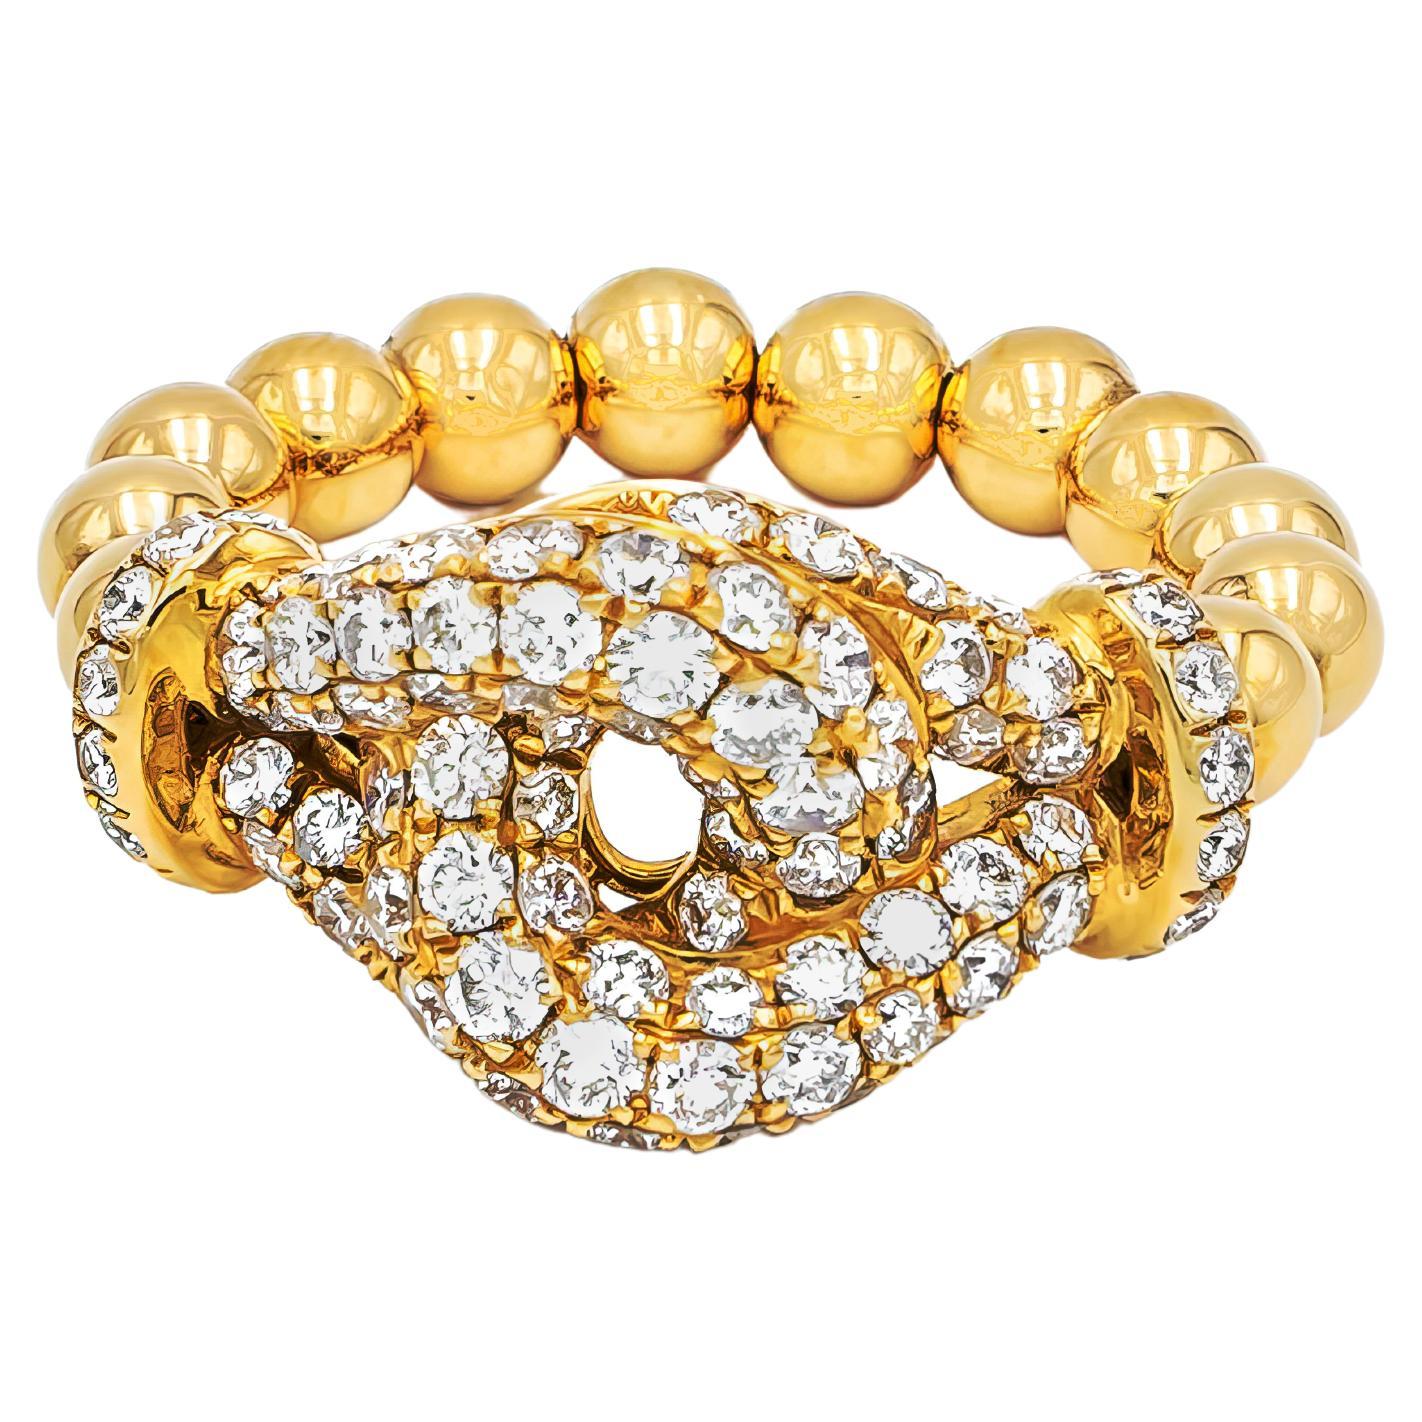 Moving Golden Balls Ring Set with Diamonds in 18k Gold For Sale